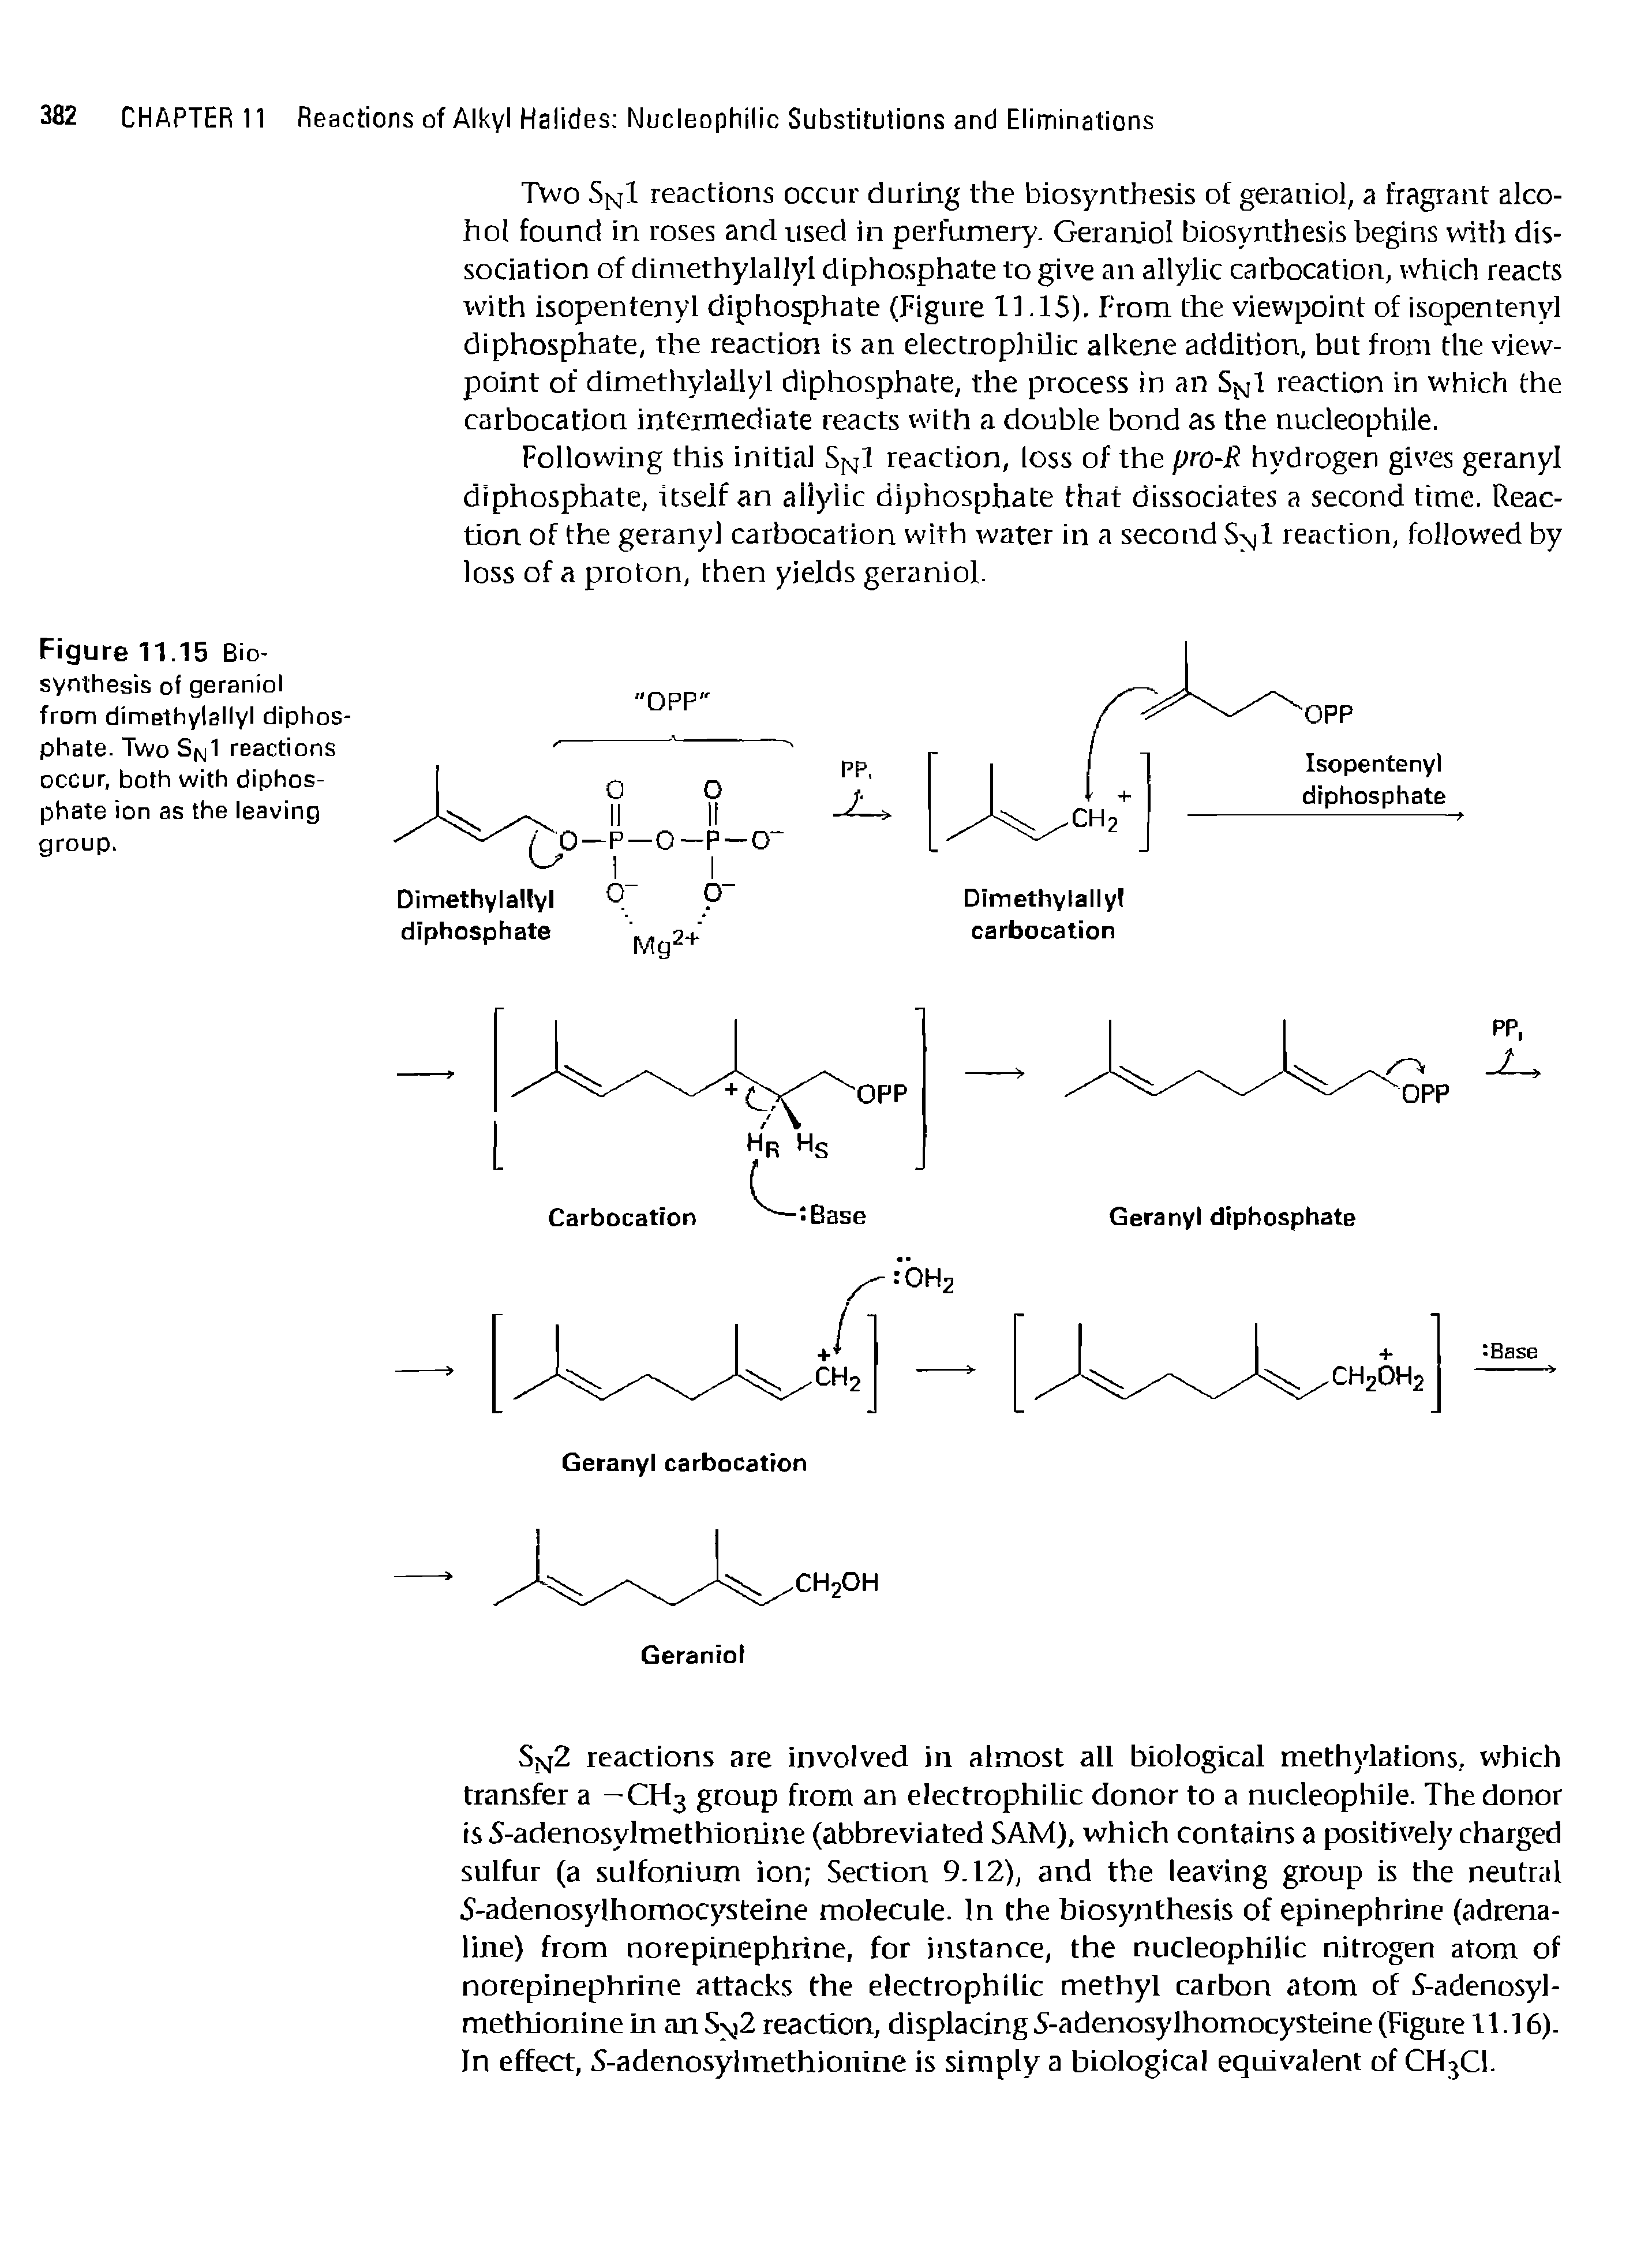 Figure 11.15 Biosynthesis of geraniol from dimethylallyl diphosphate. Two Sfvjl reactions occur, both with diphosphate ion as the leaving group.